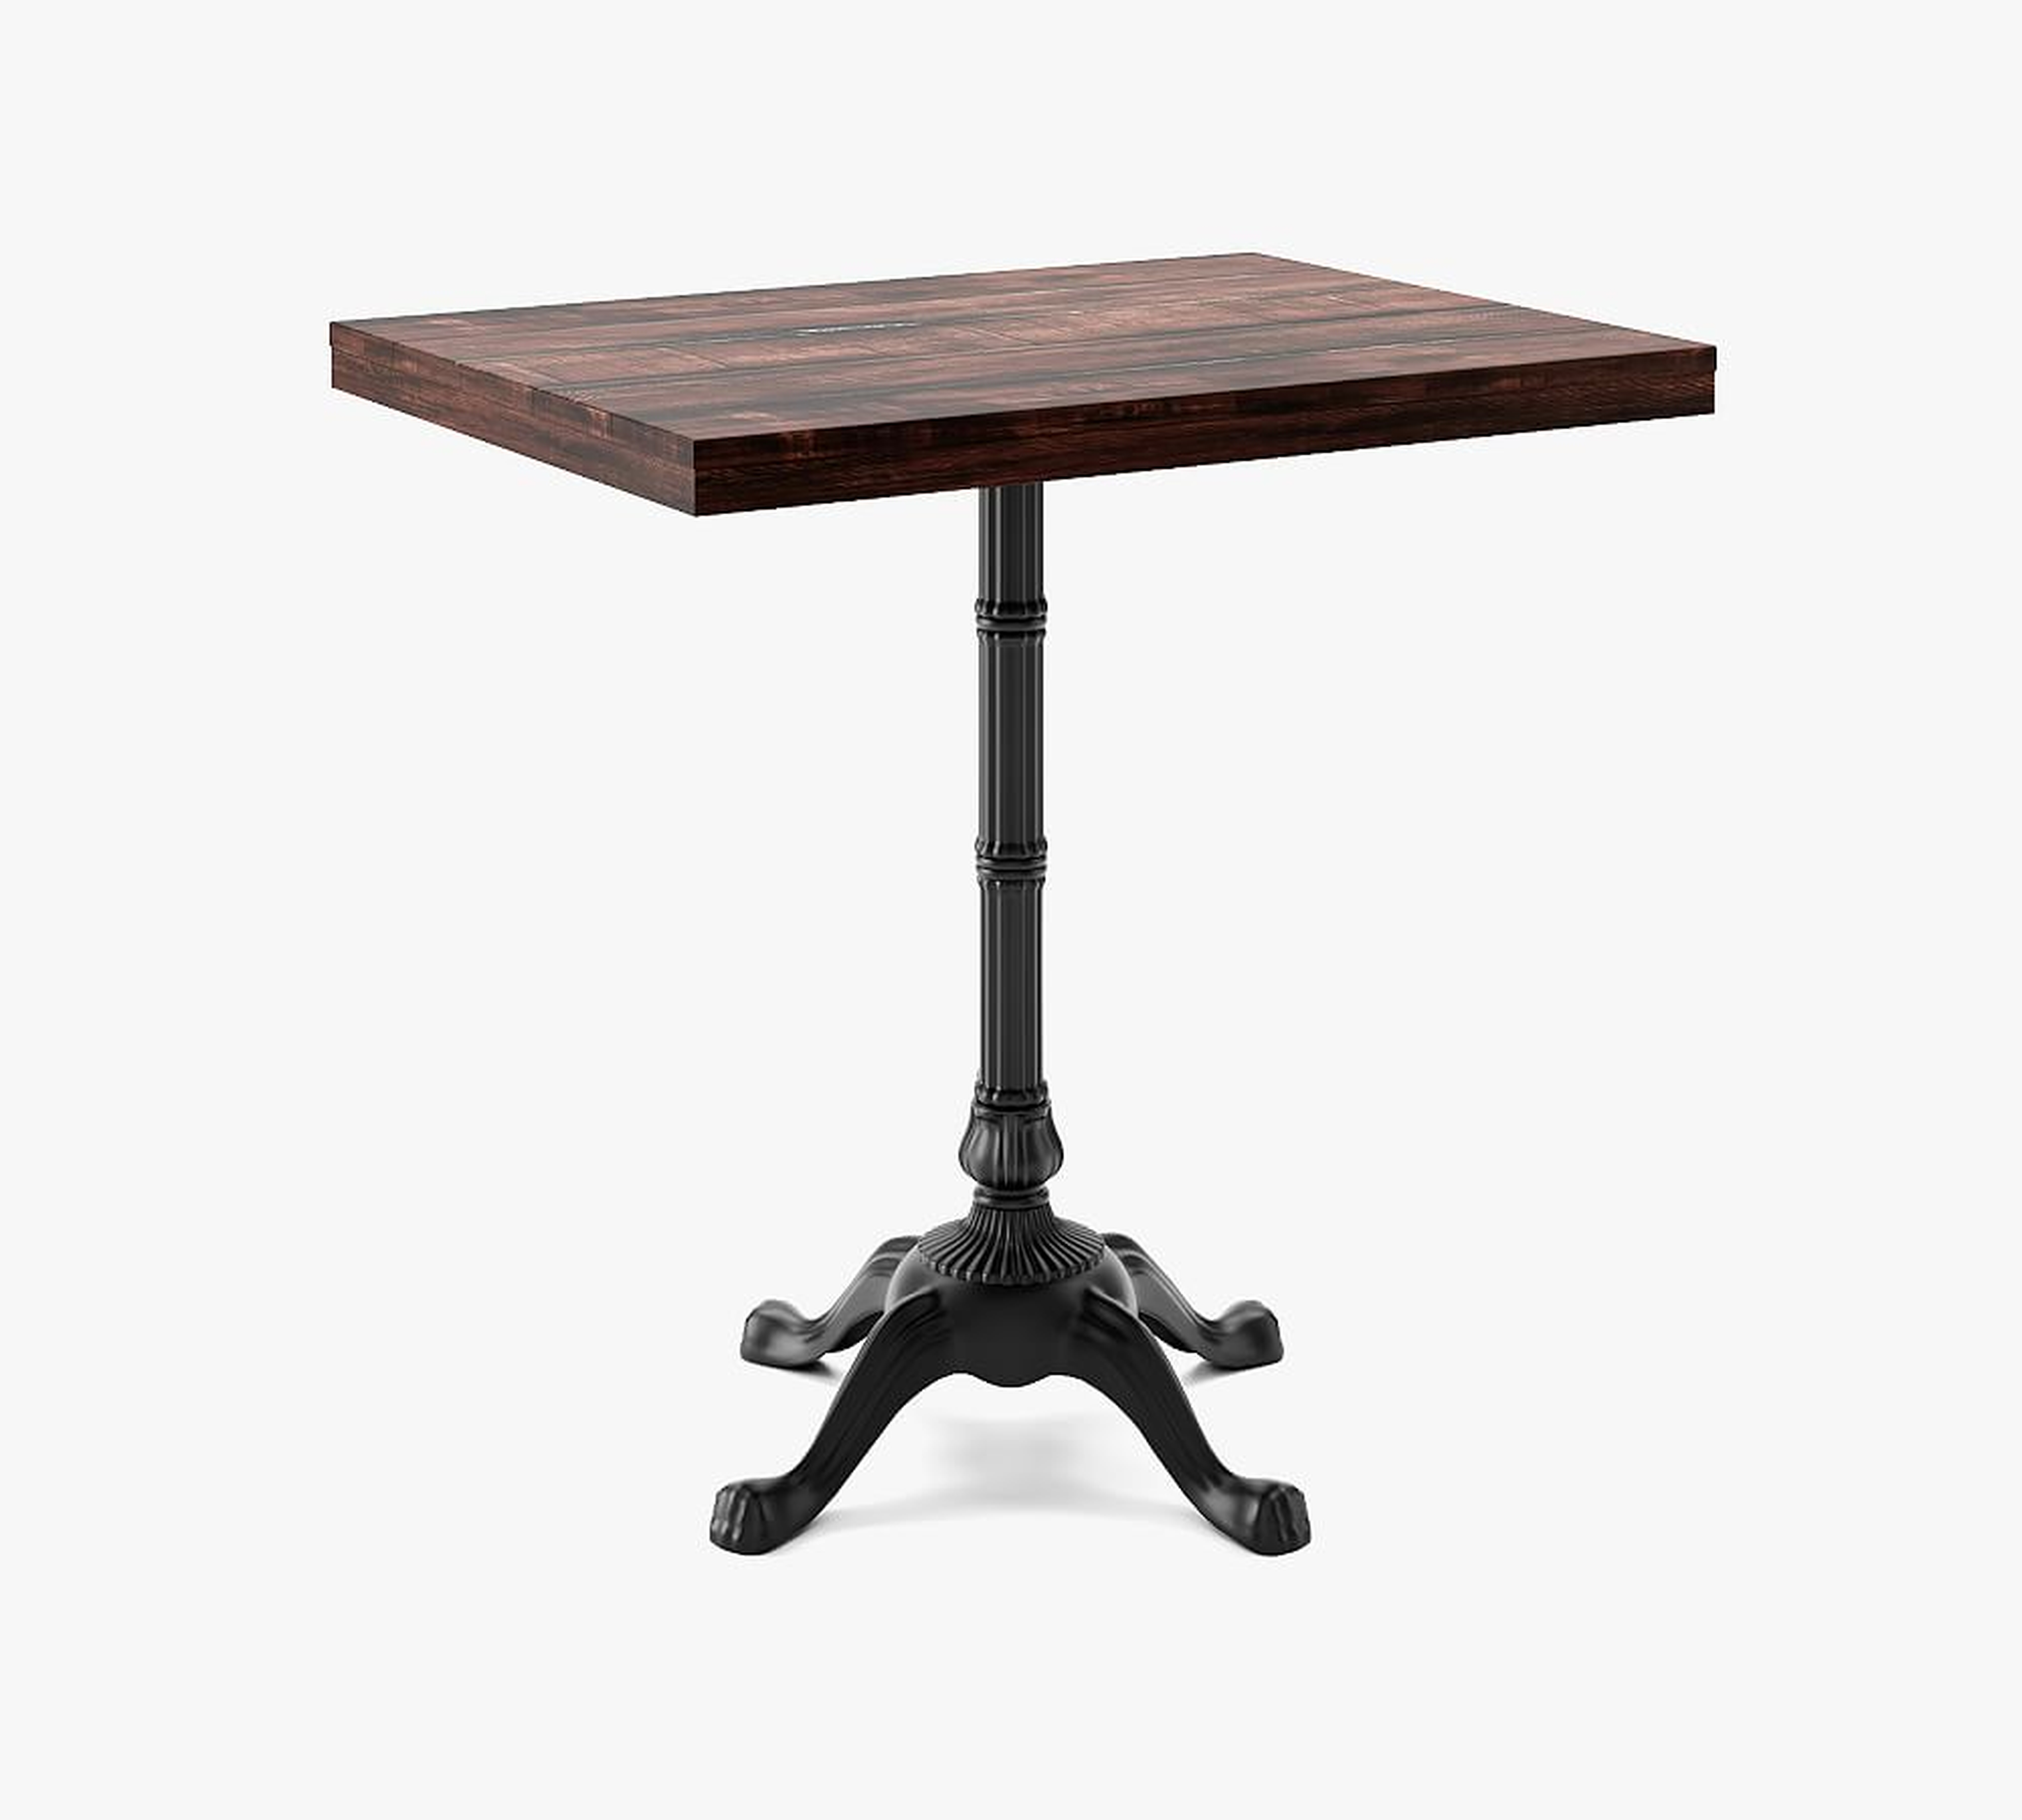 24"x32" Rectangle Pedestal Dining Table, Rustic Mahogany Wood Top, Small Bistro Base - Pottery Barn